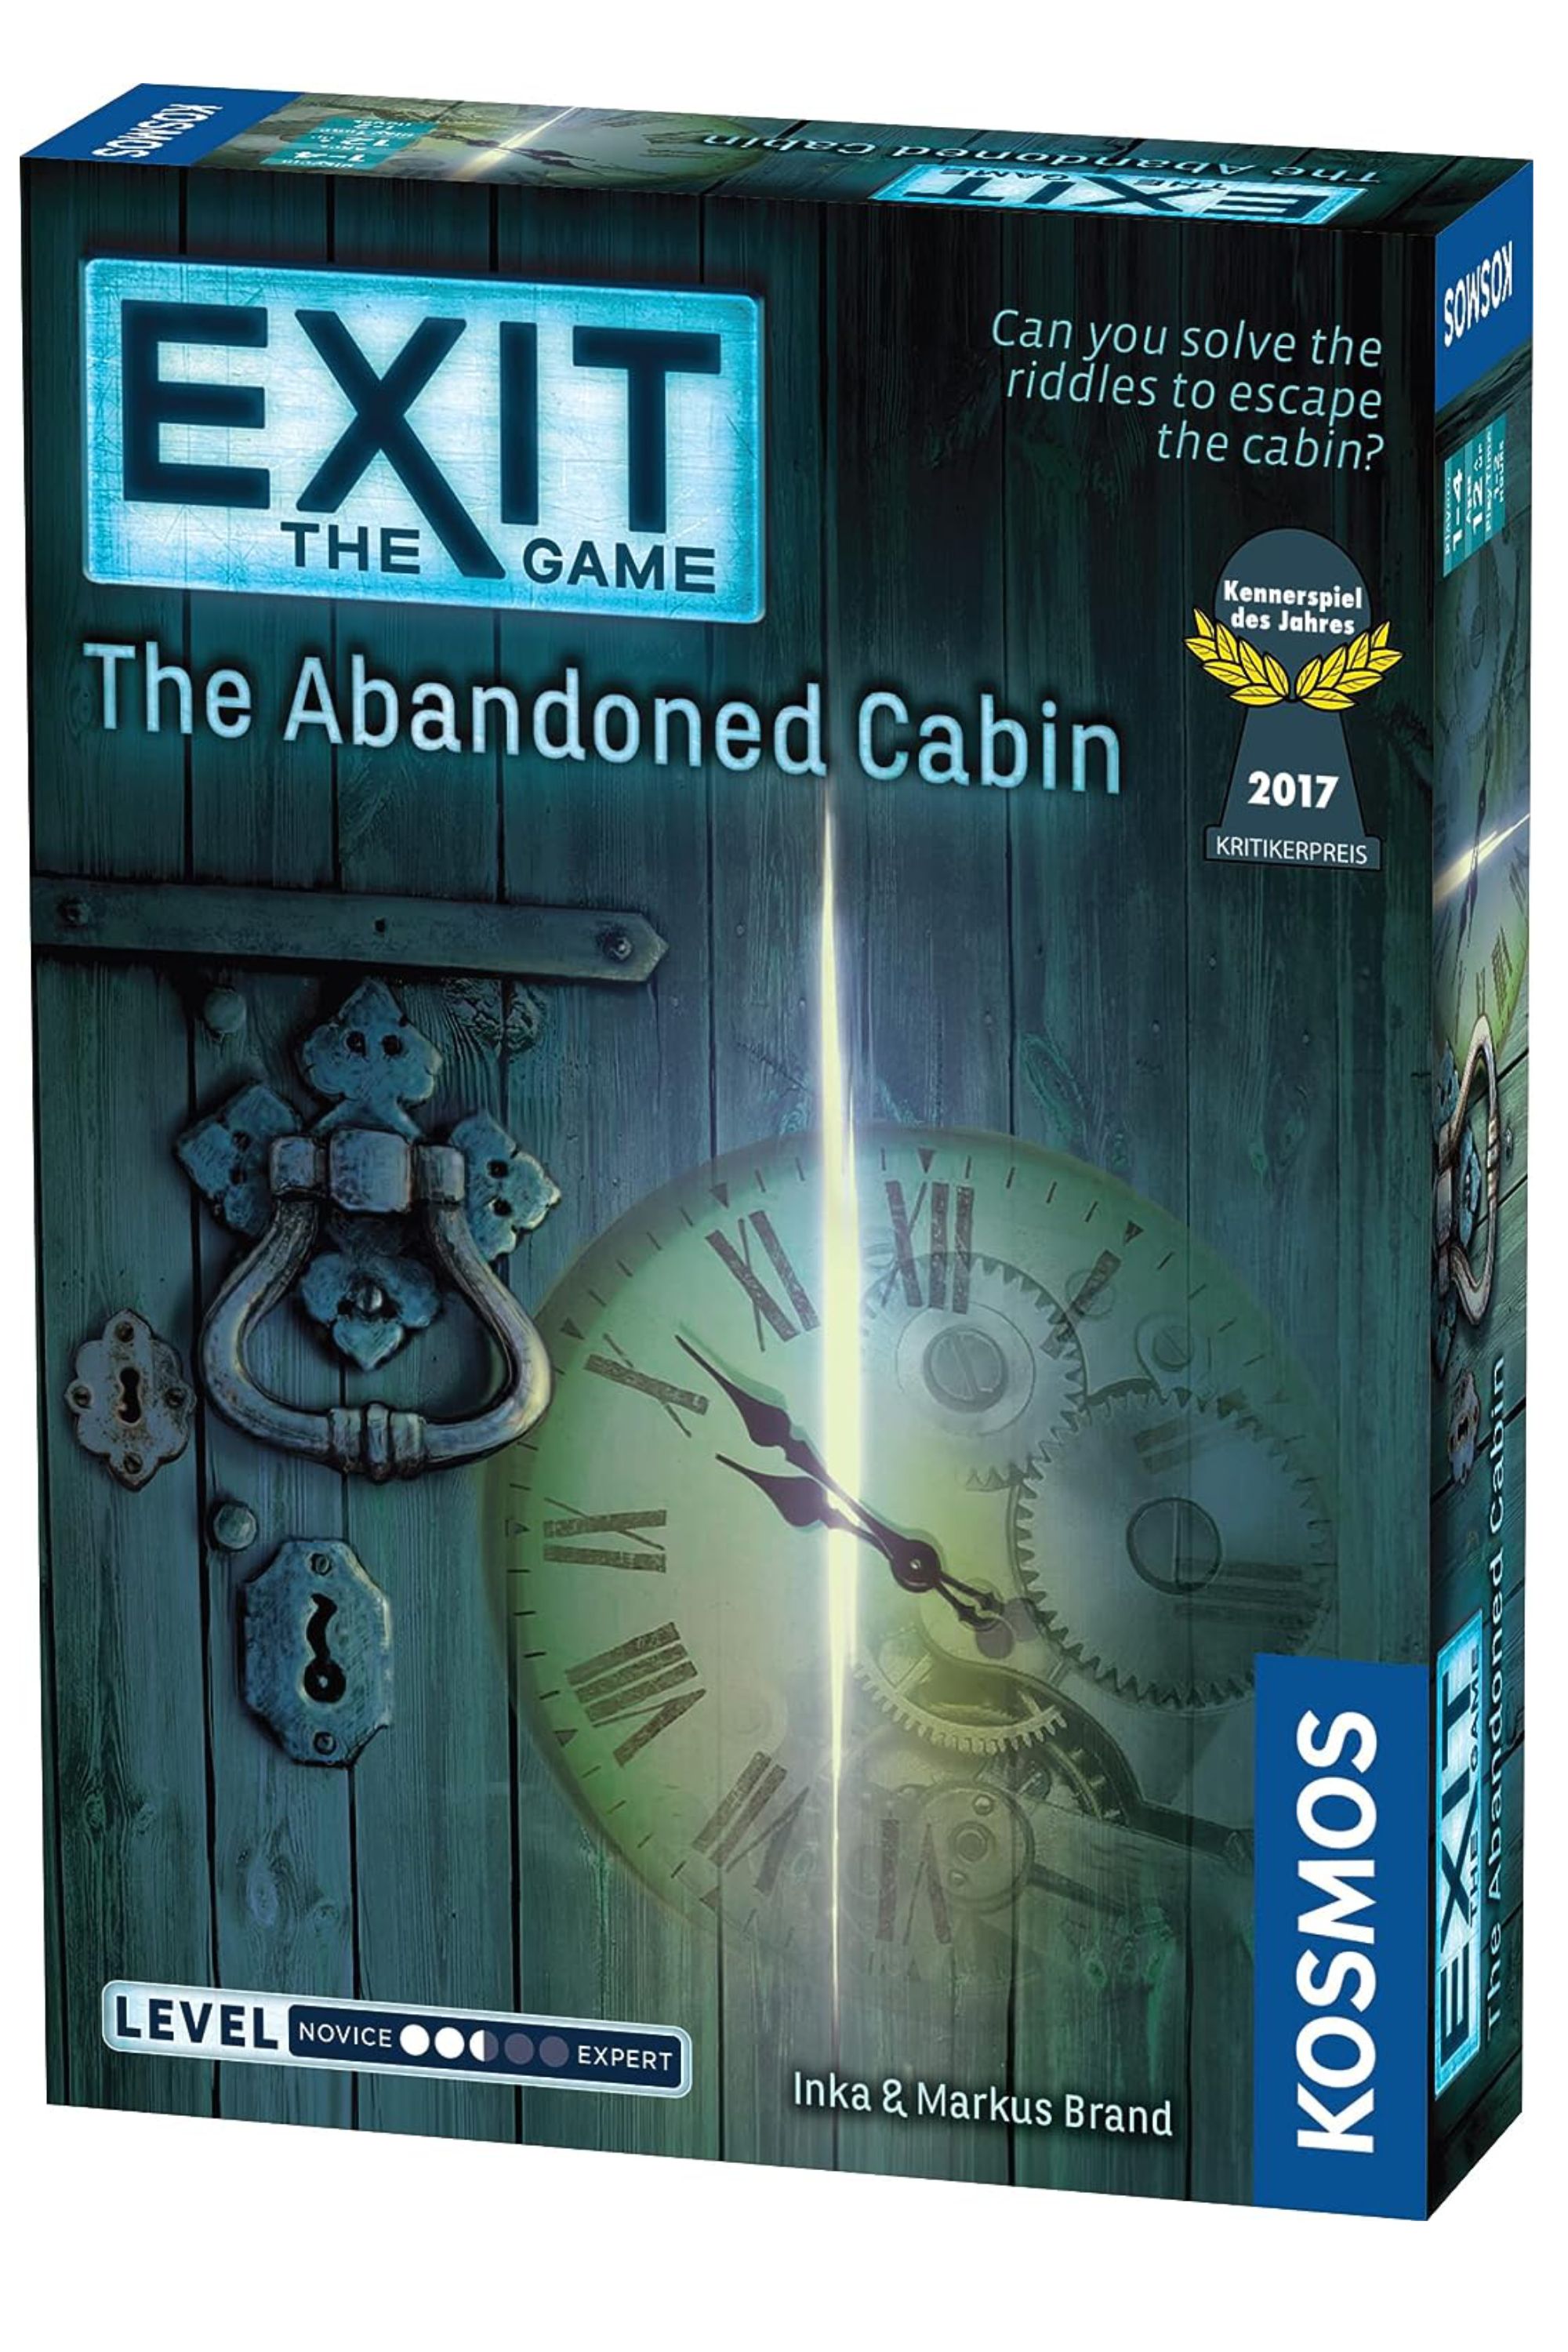 Exit the abandoned cabin game box